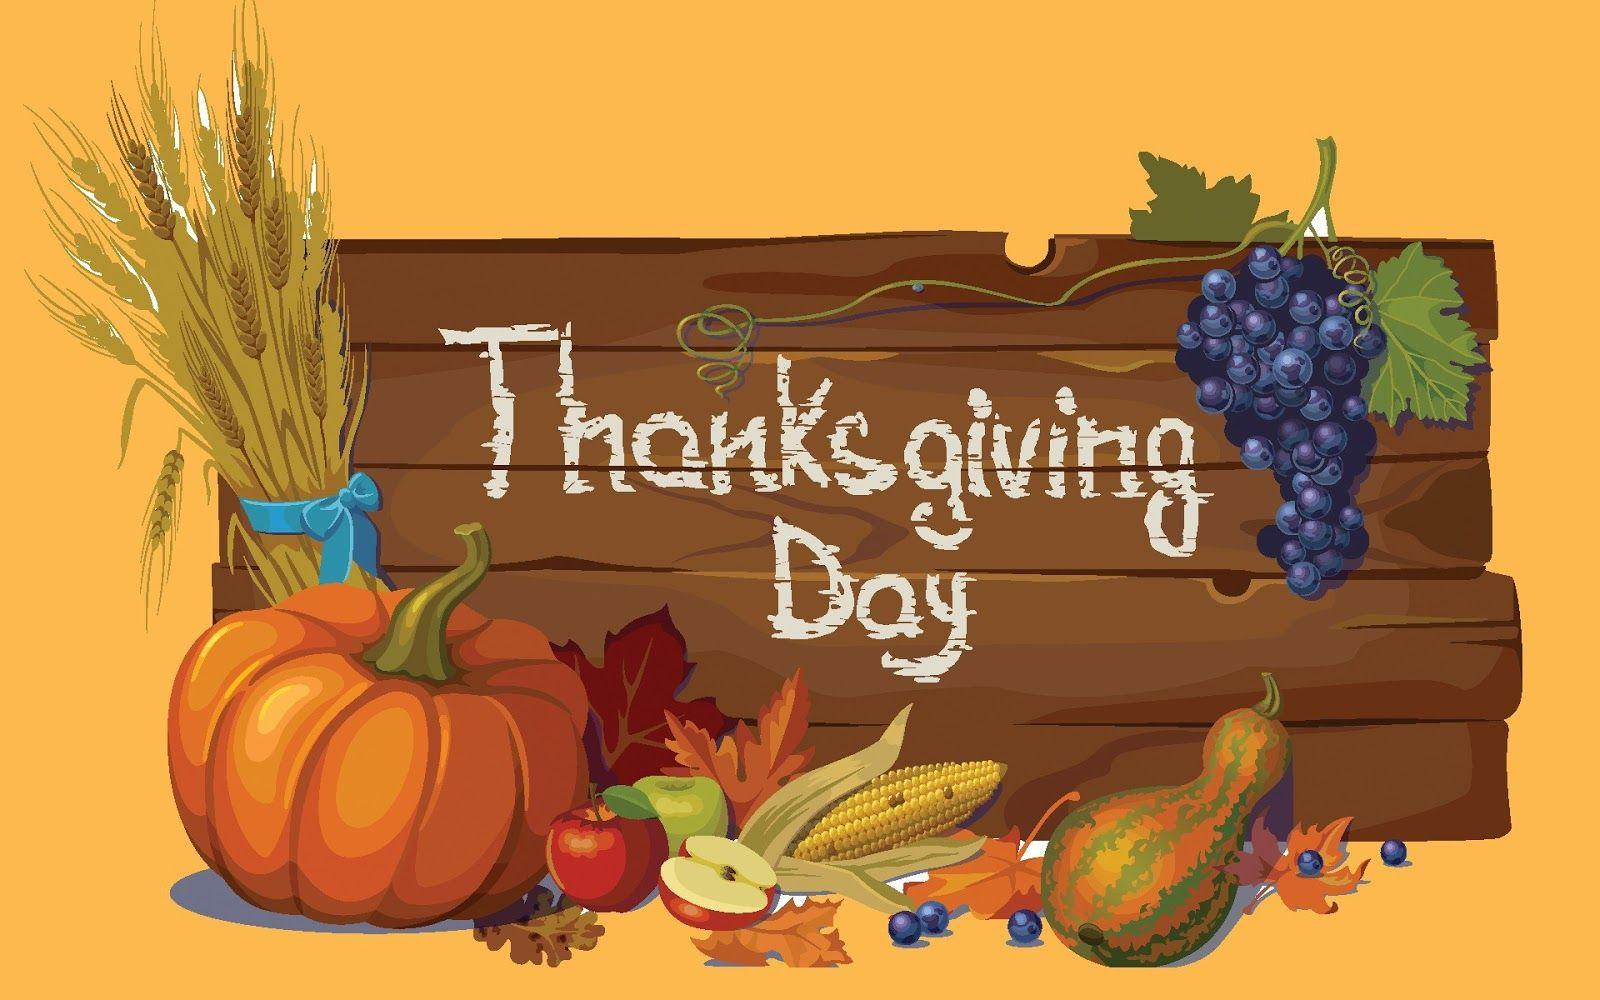 Happy Thanksgiving 2019 Quotes, Image, Picture, Wishes